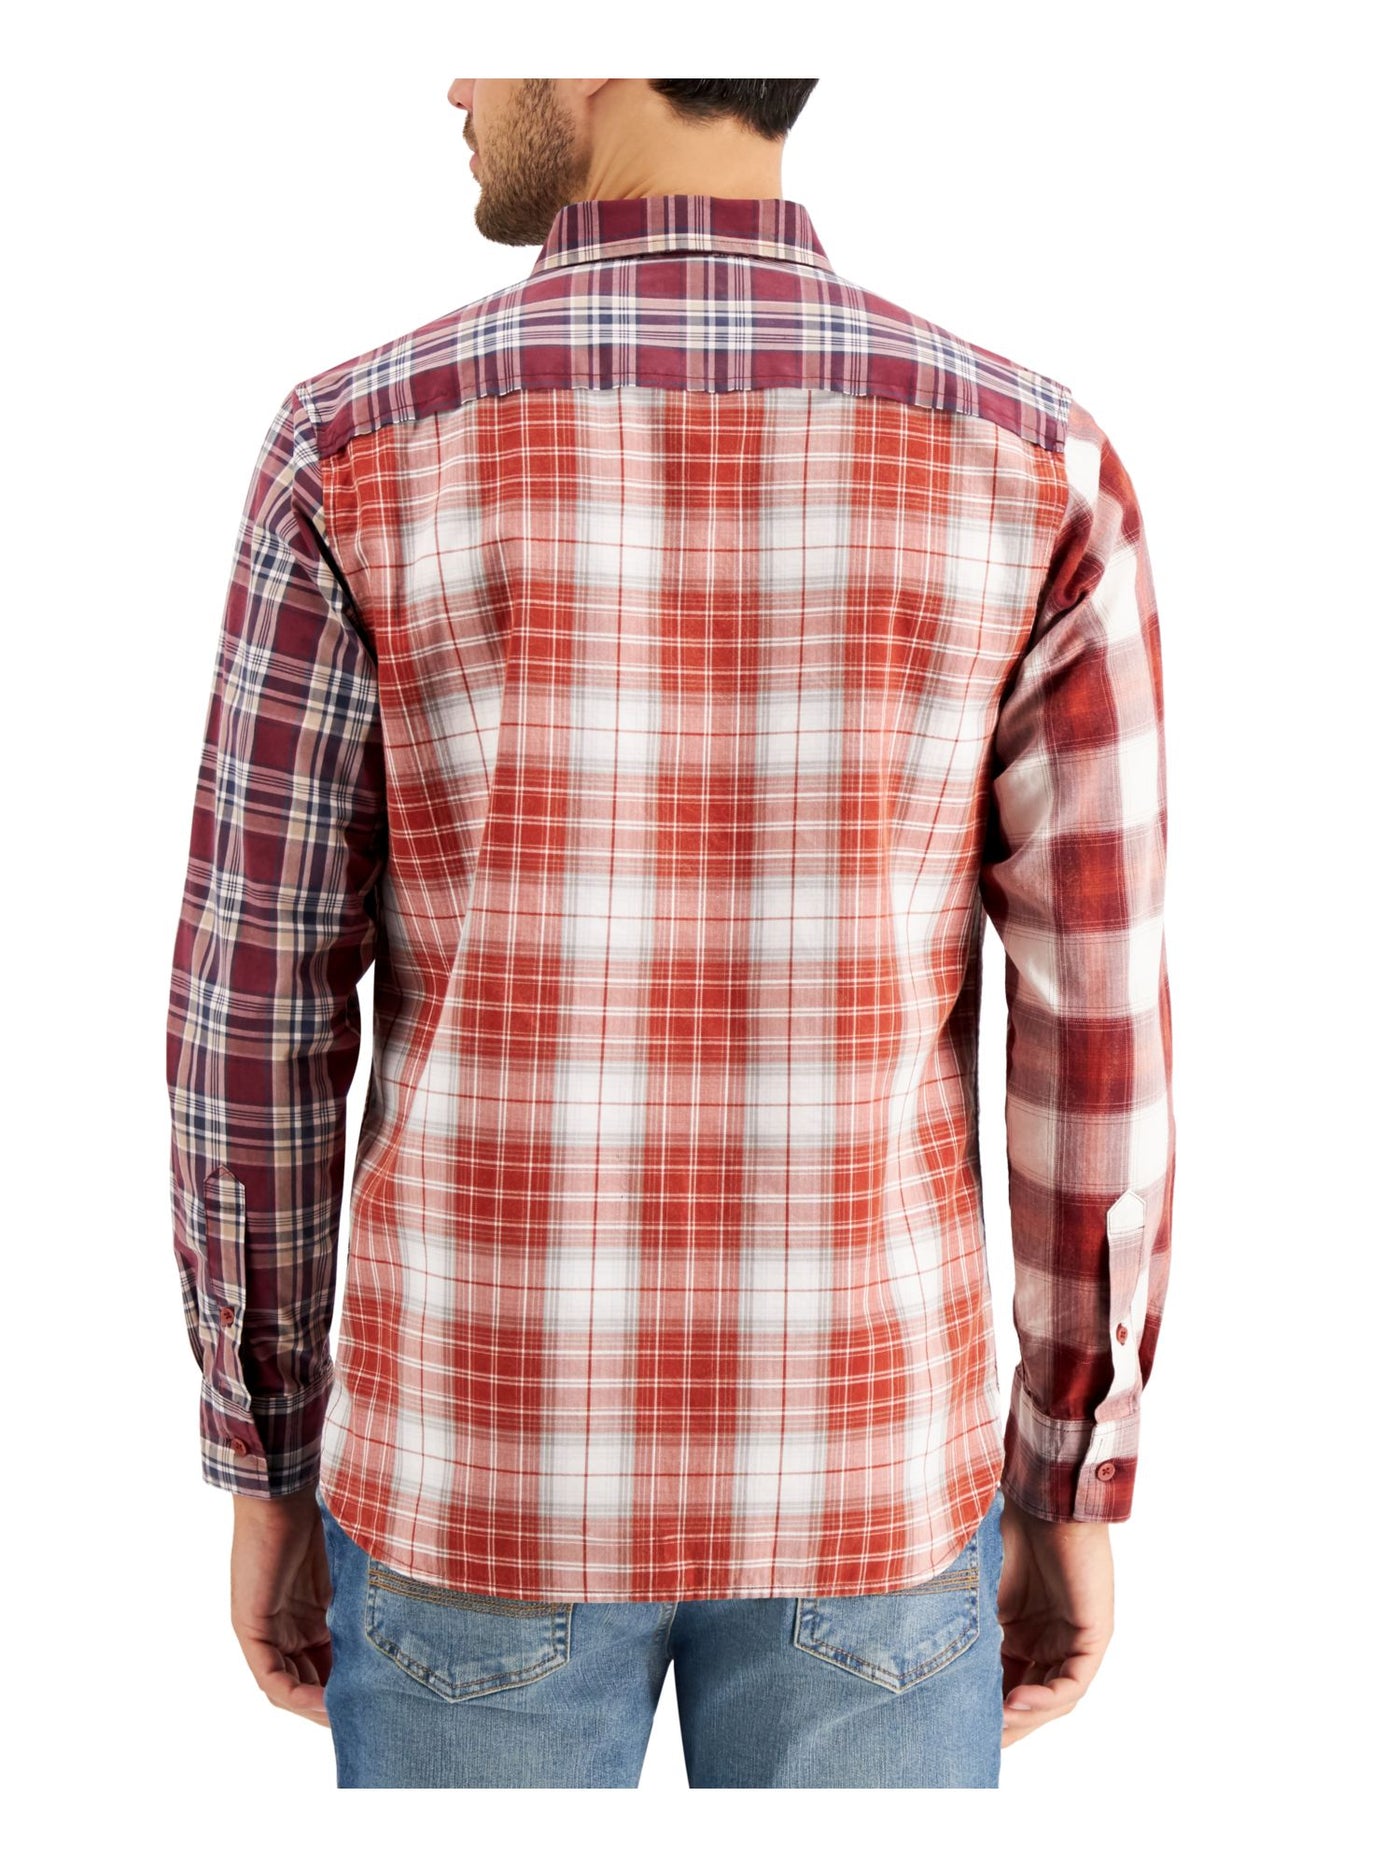 SUN STONE Mens Red Plaid Long Sleeve Point Collar Classic Fit Button Down Cotton Shirt S